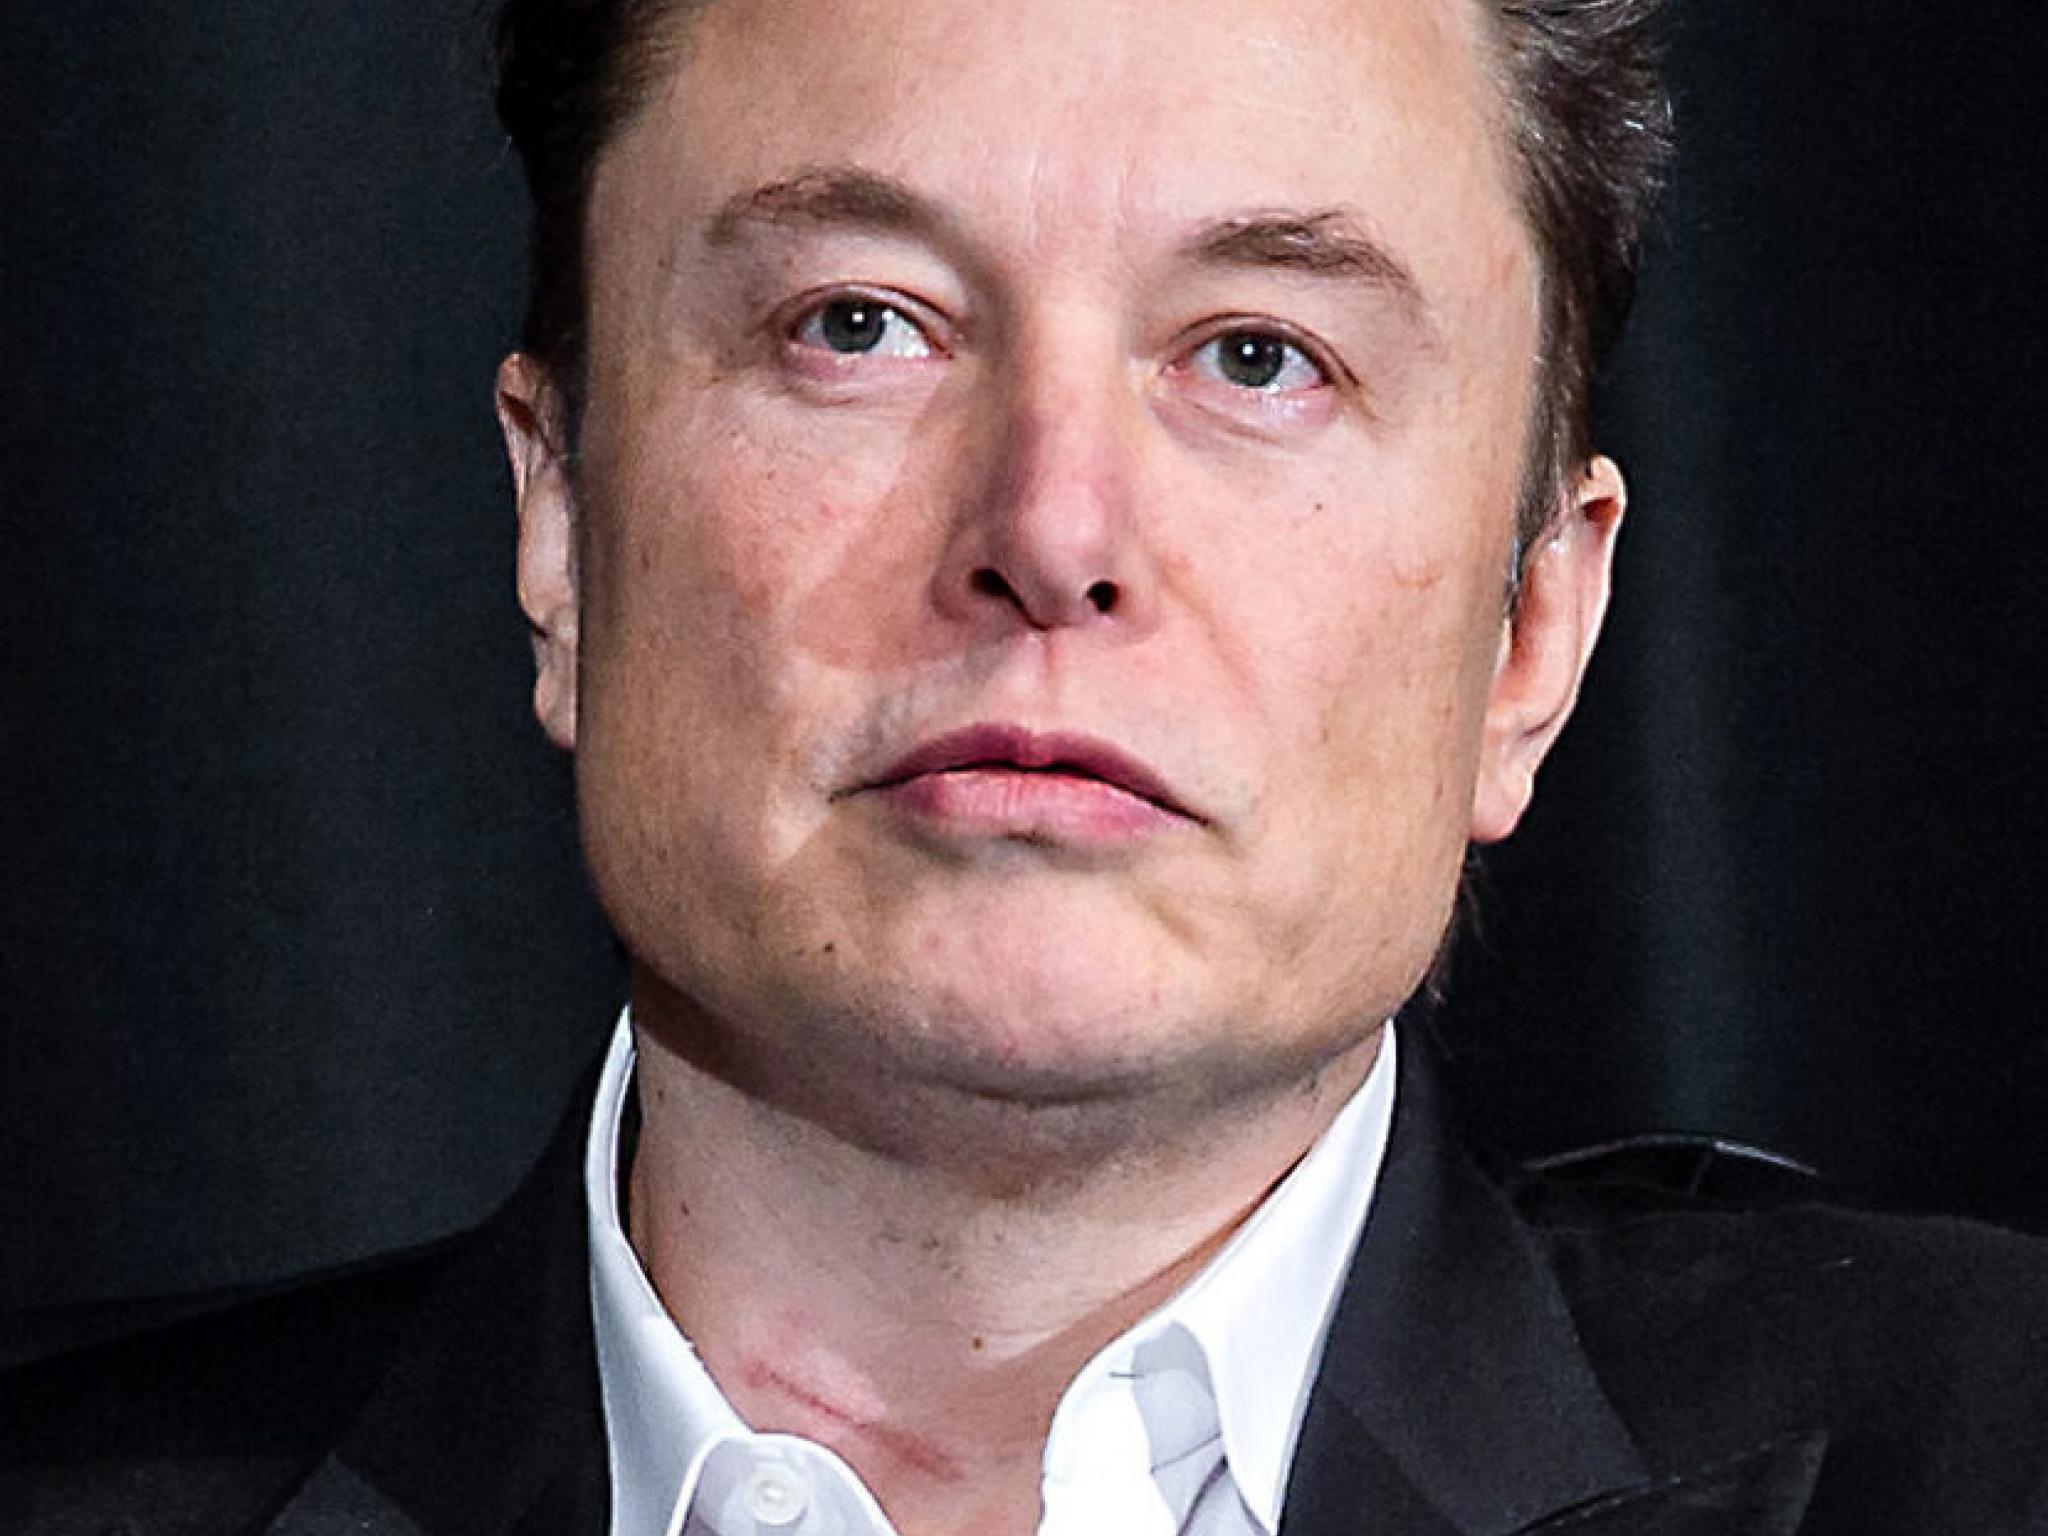  elon-musk-answers-question-on-reducing-involvement-at-tesla-in-coming-3-years-its-rare-for-me-to-take-a-sunday-afternoon 